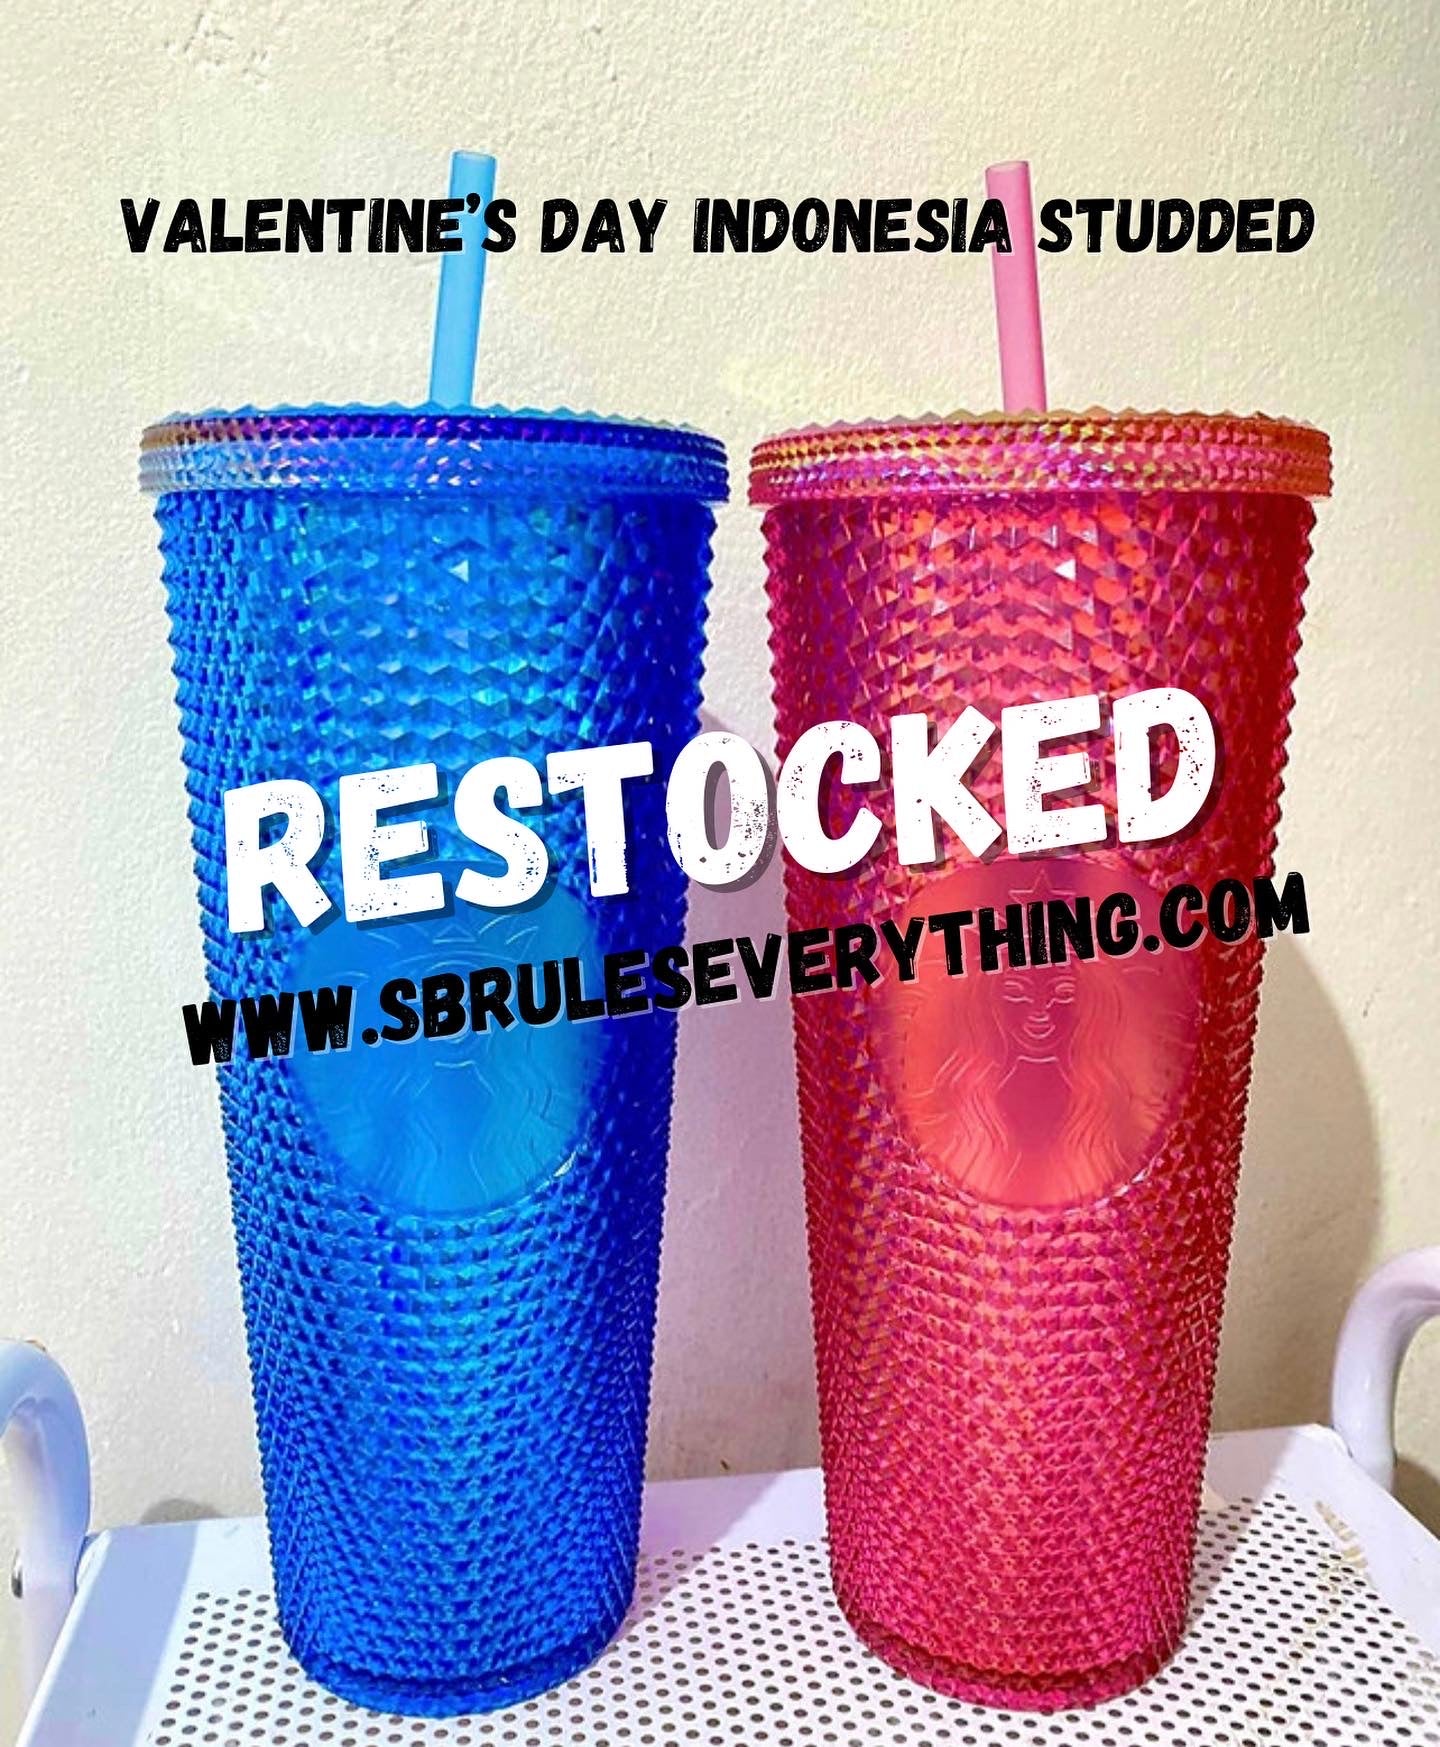 Pink Strawberry & Blue Blueberry Valentine’s Day Studded - Indonesia